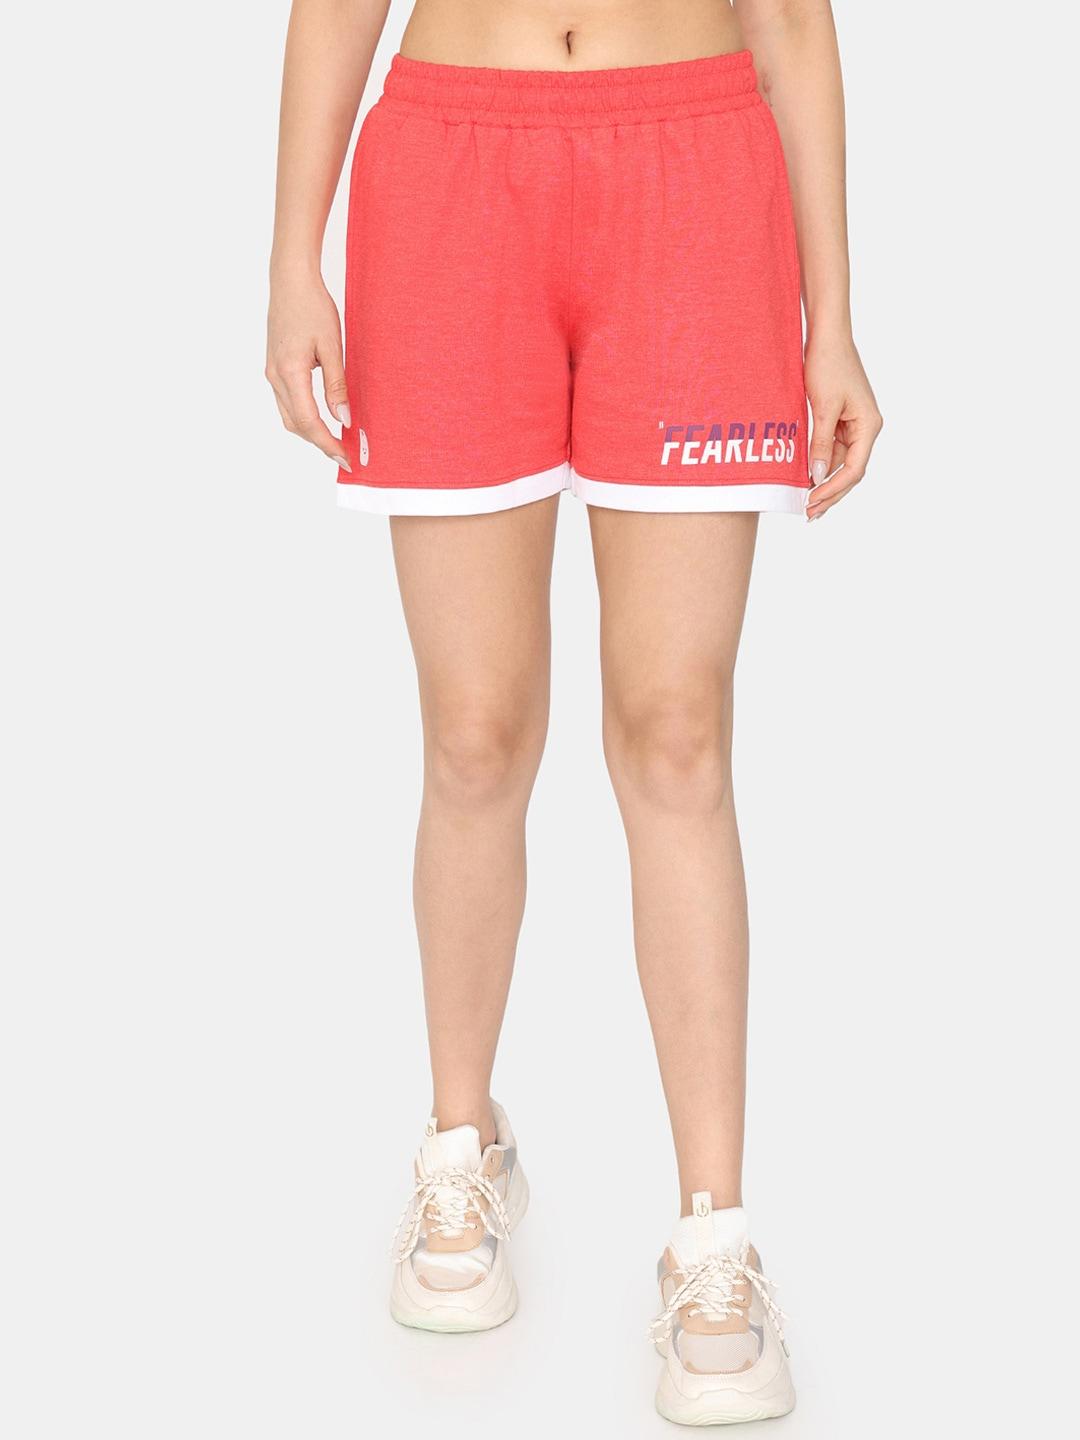 rosaline-by-zivame-women-mid-rise-training-or-gym-sports-shorts